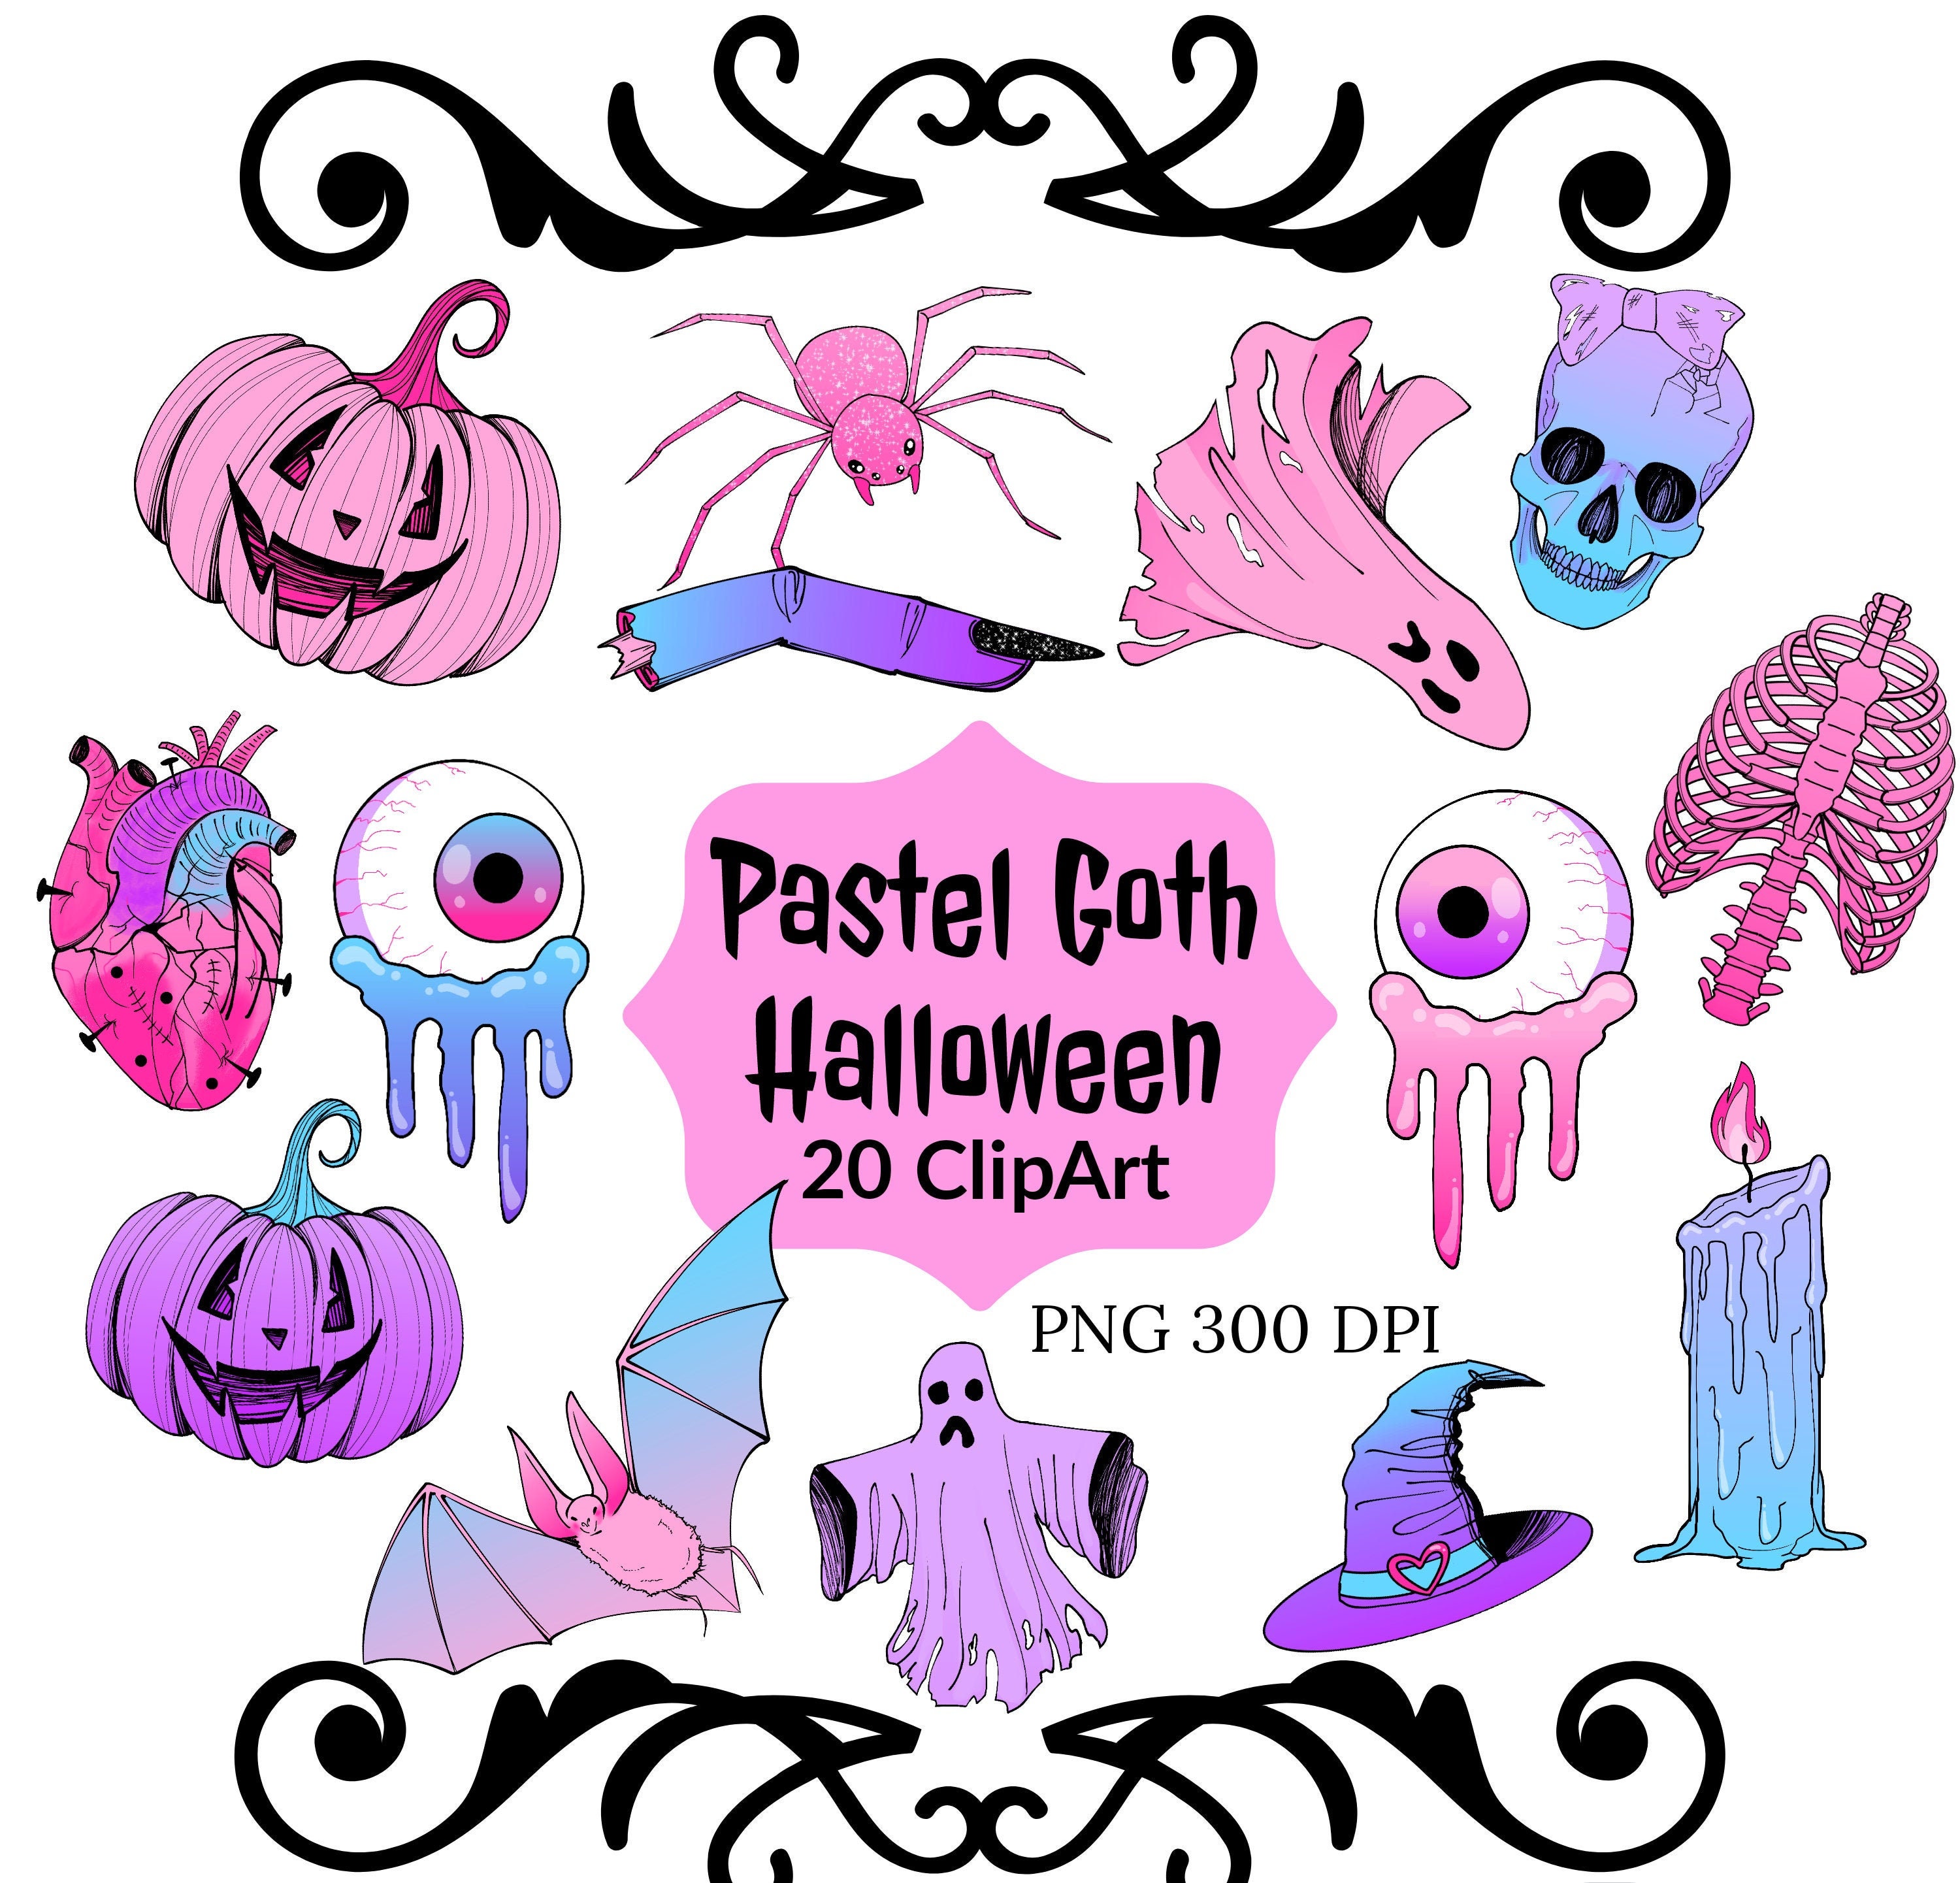 Pastel Goth Halloween Clipart PNG Digital Download - Etsy